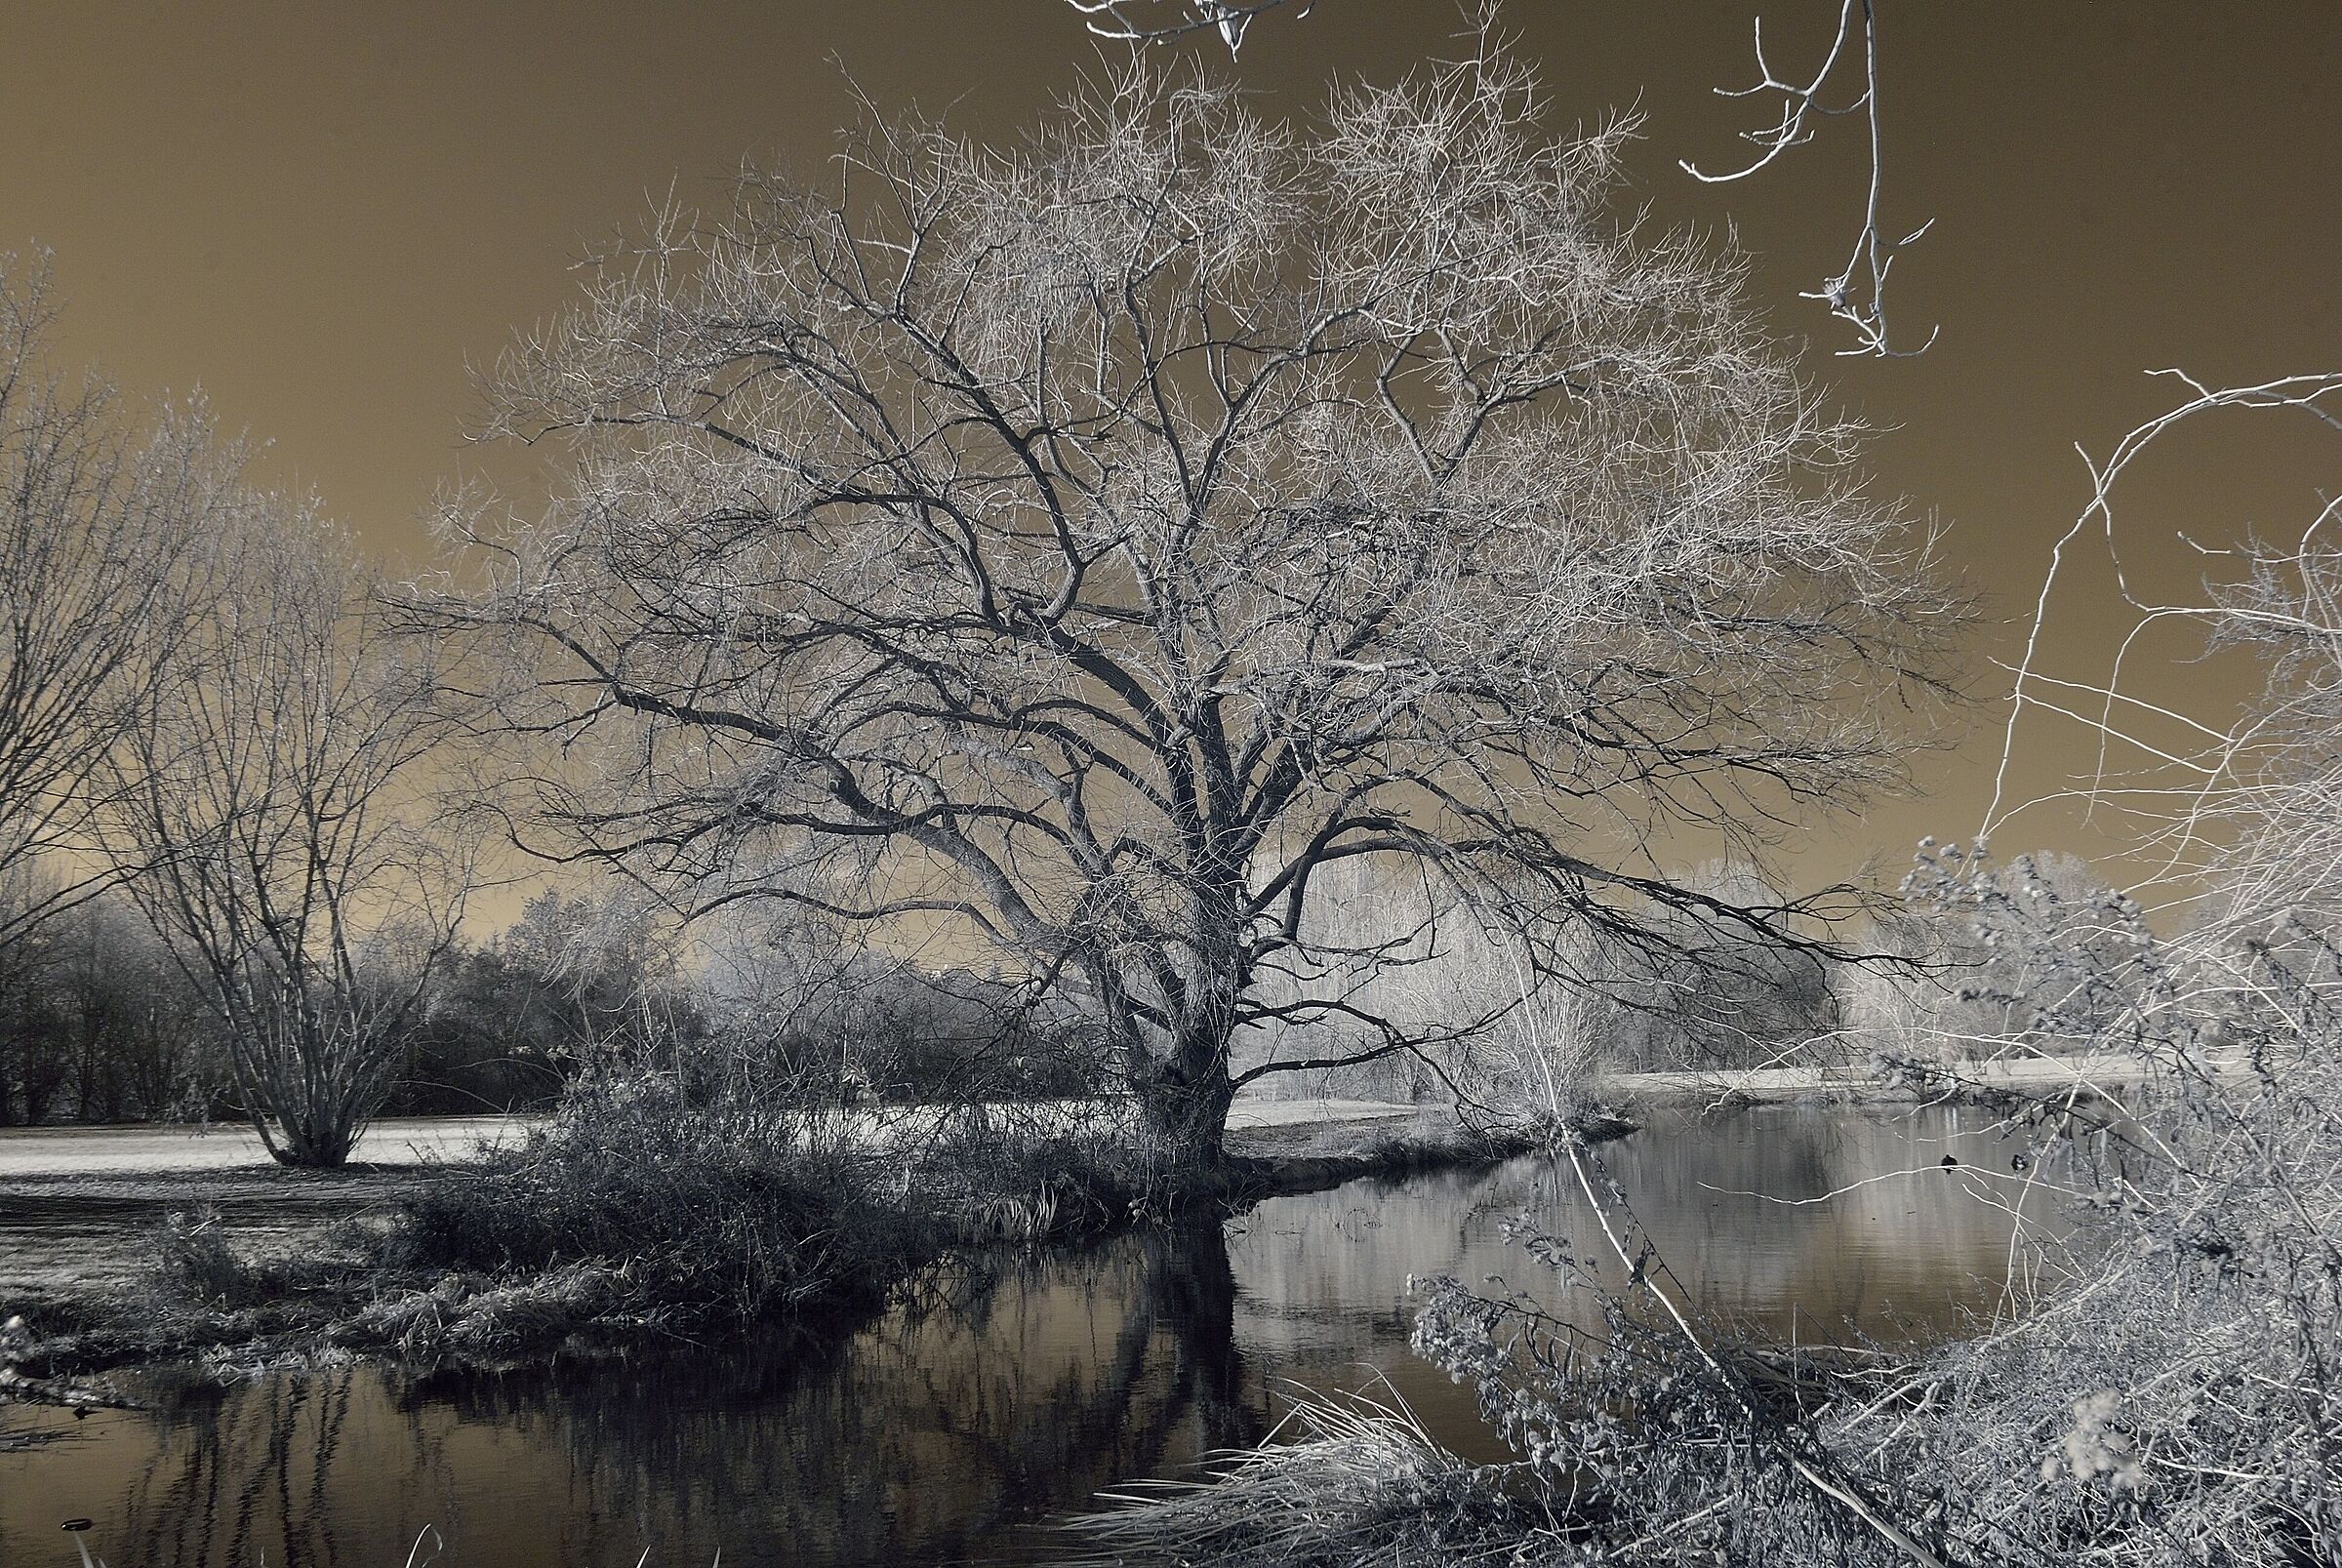 Willow on the infrared pond ...